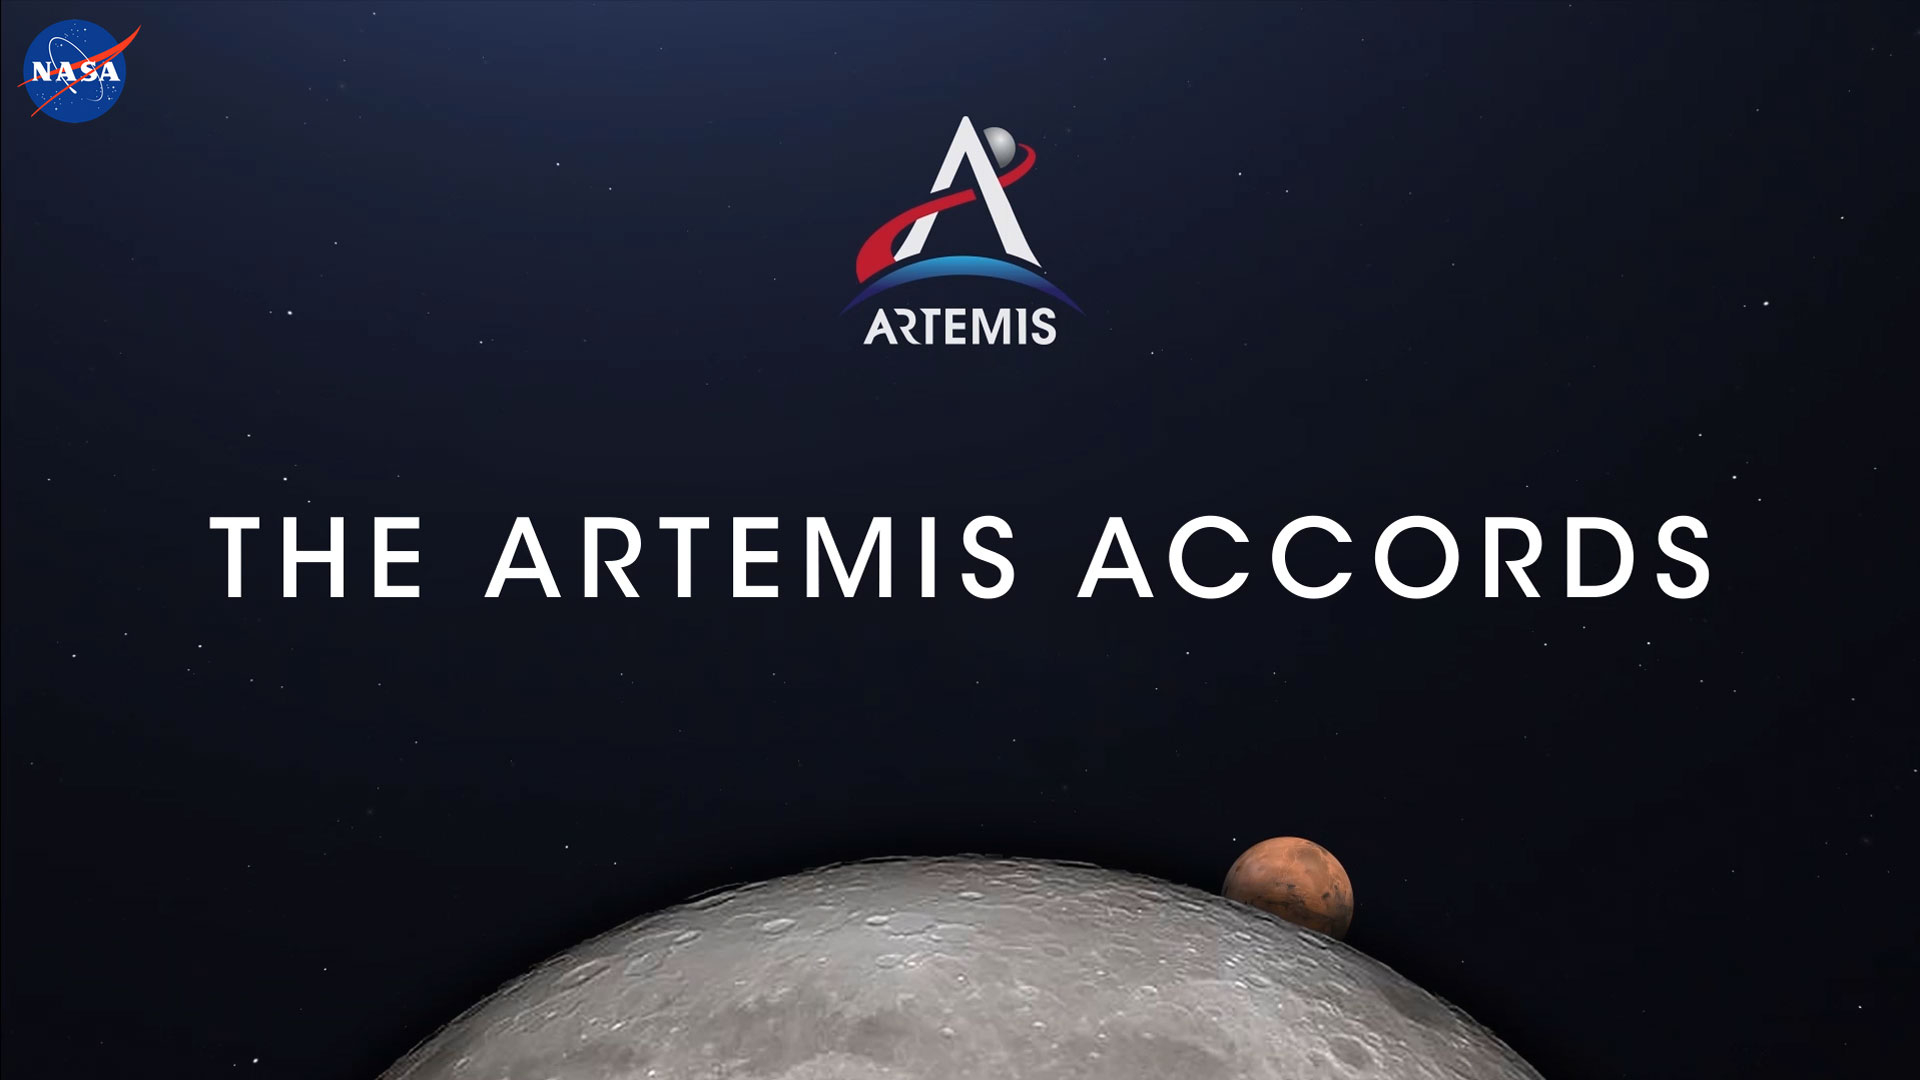 Cooperation on the moon: Are the Artemis Accords enough? Space